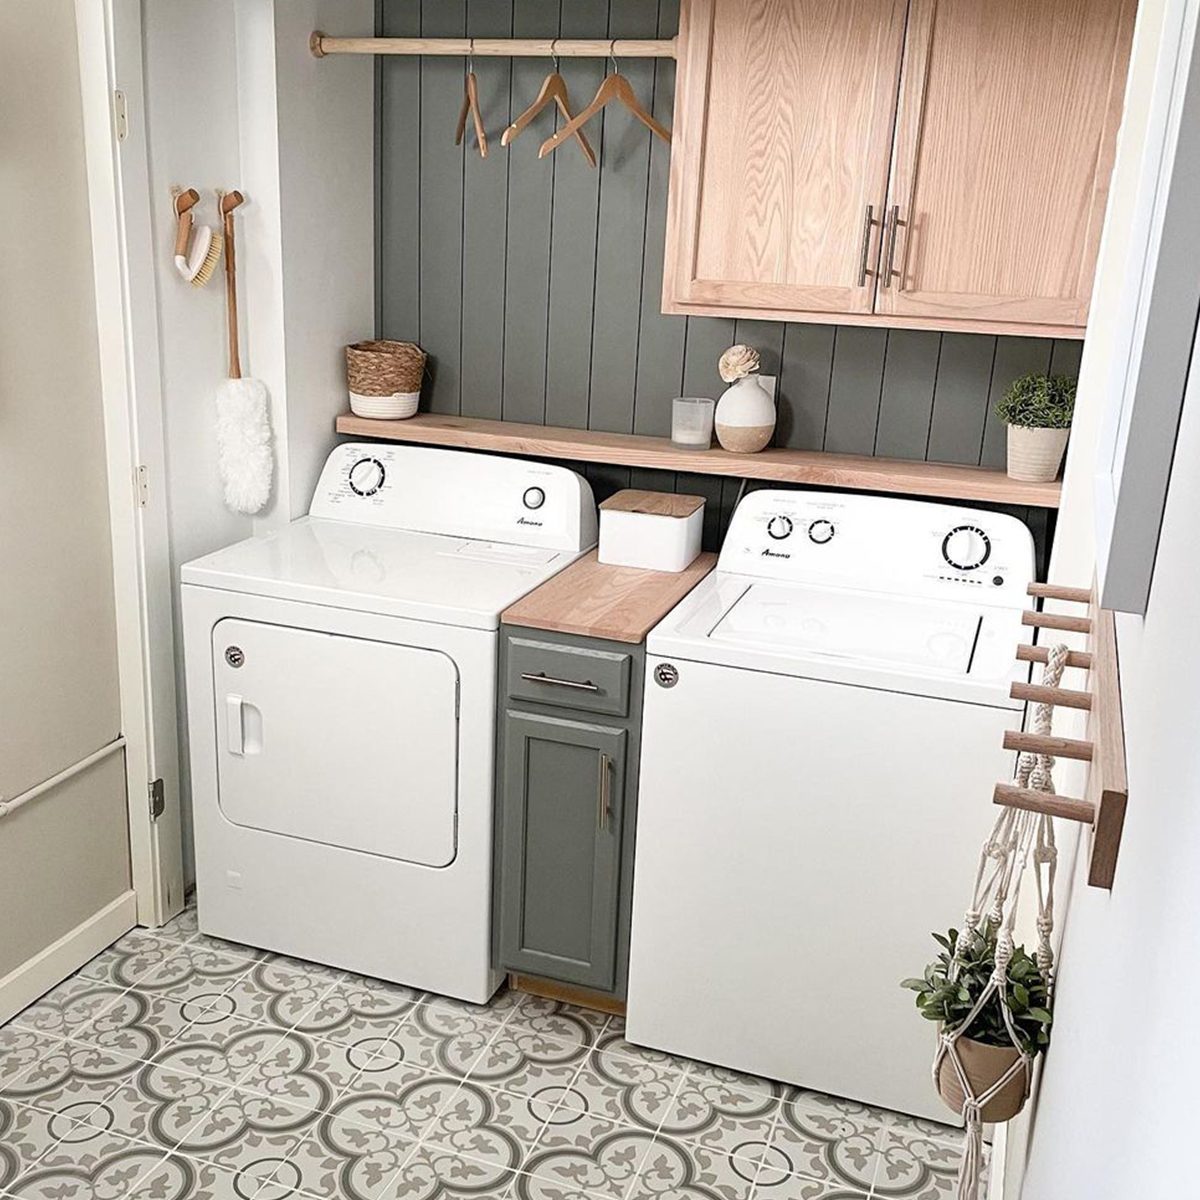 10 Laundry Room Designs That You'll Be Obsessed With